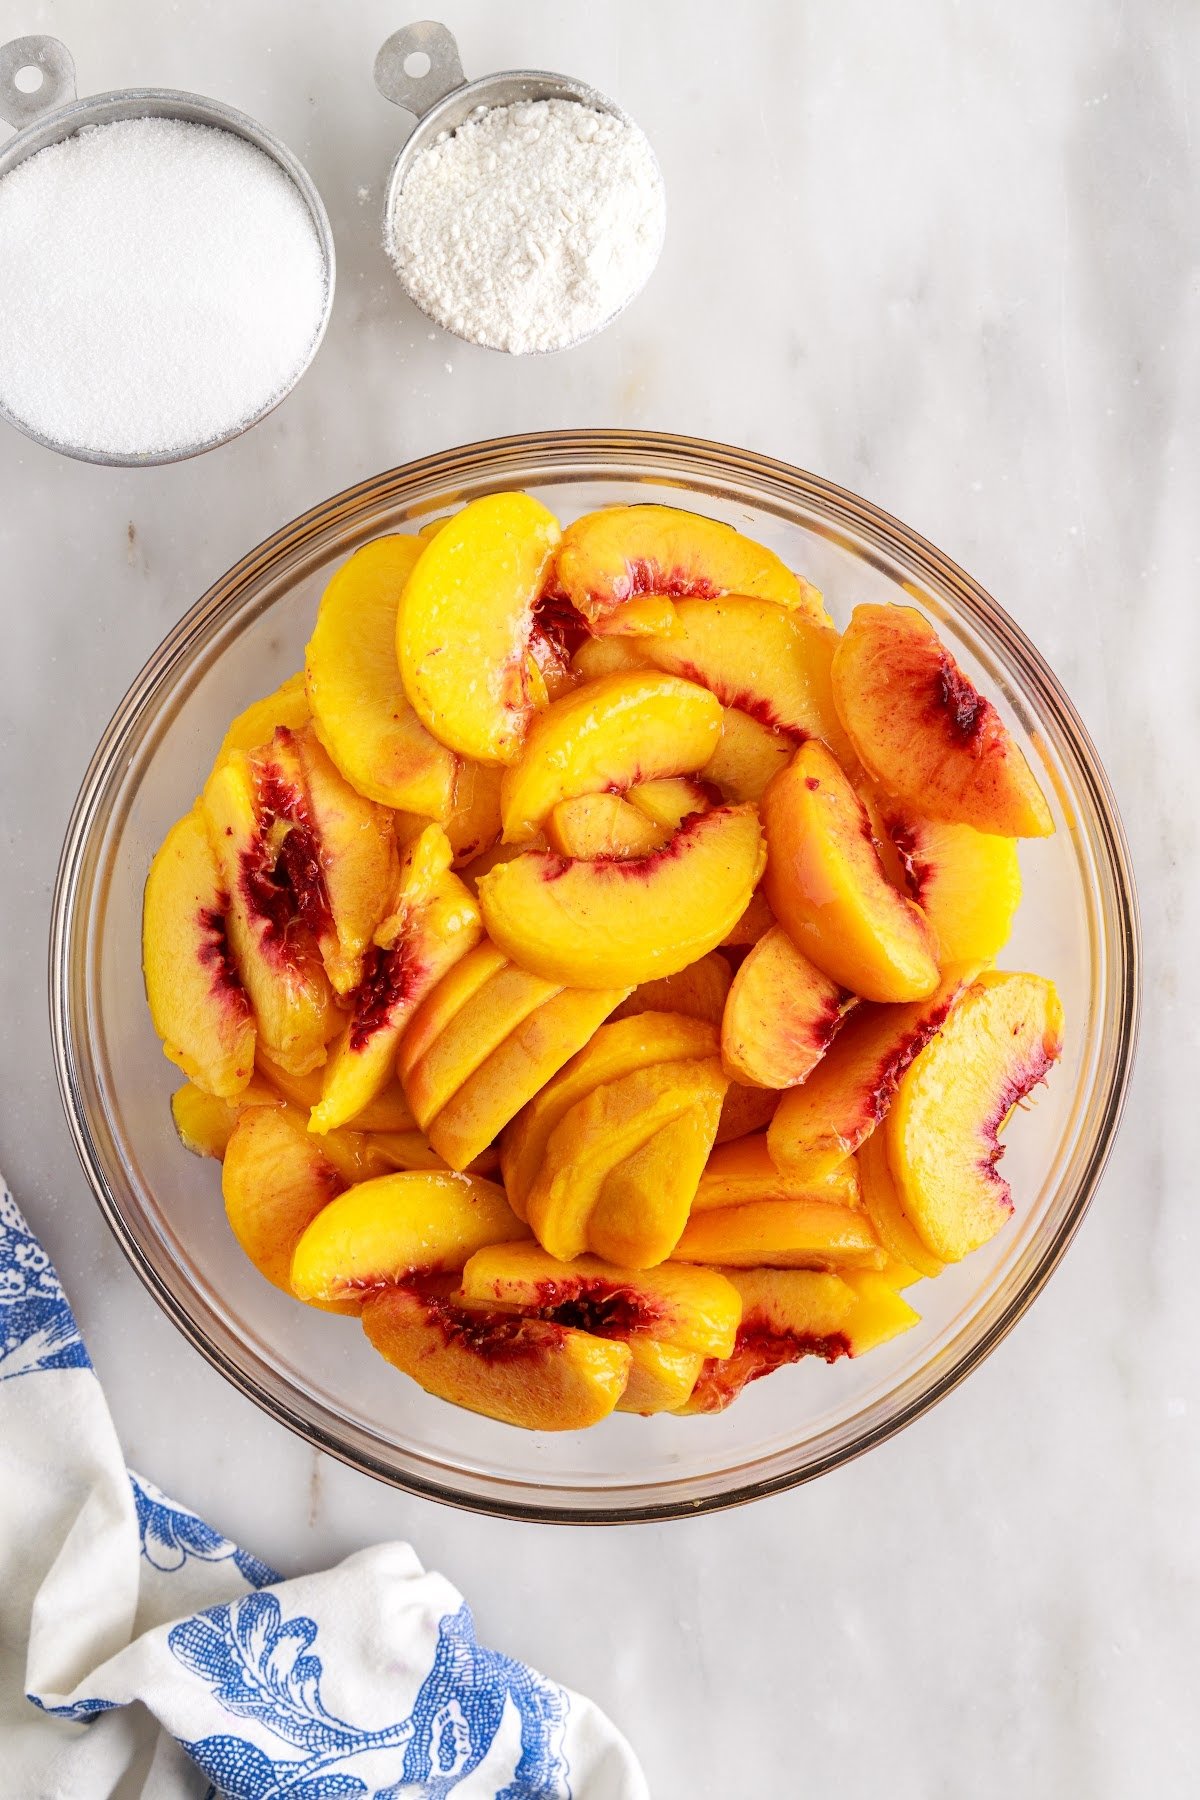 Large bowl filled with sliced peaches.